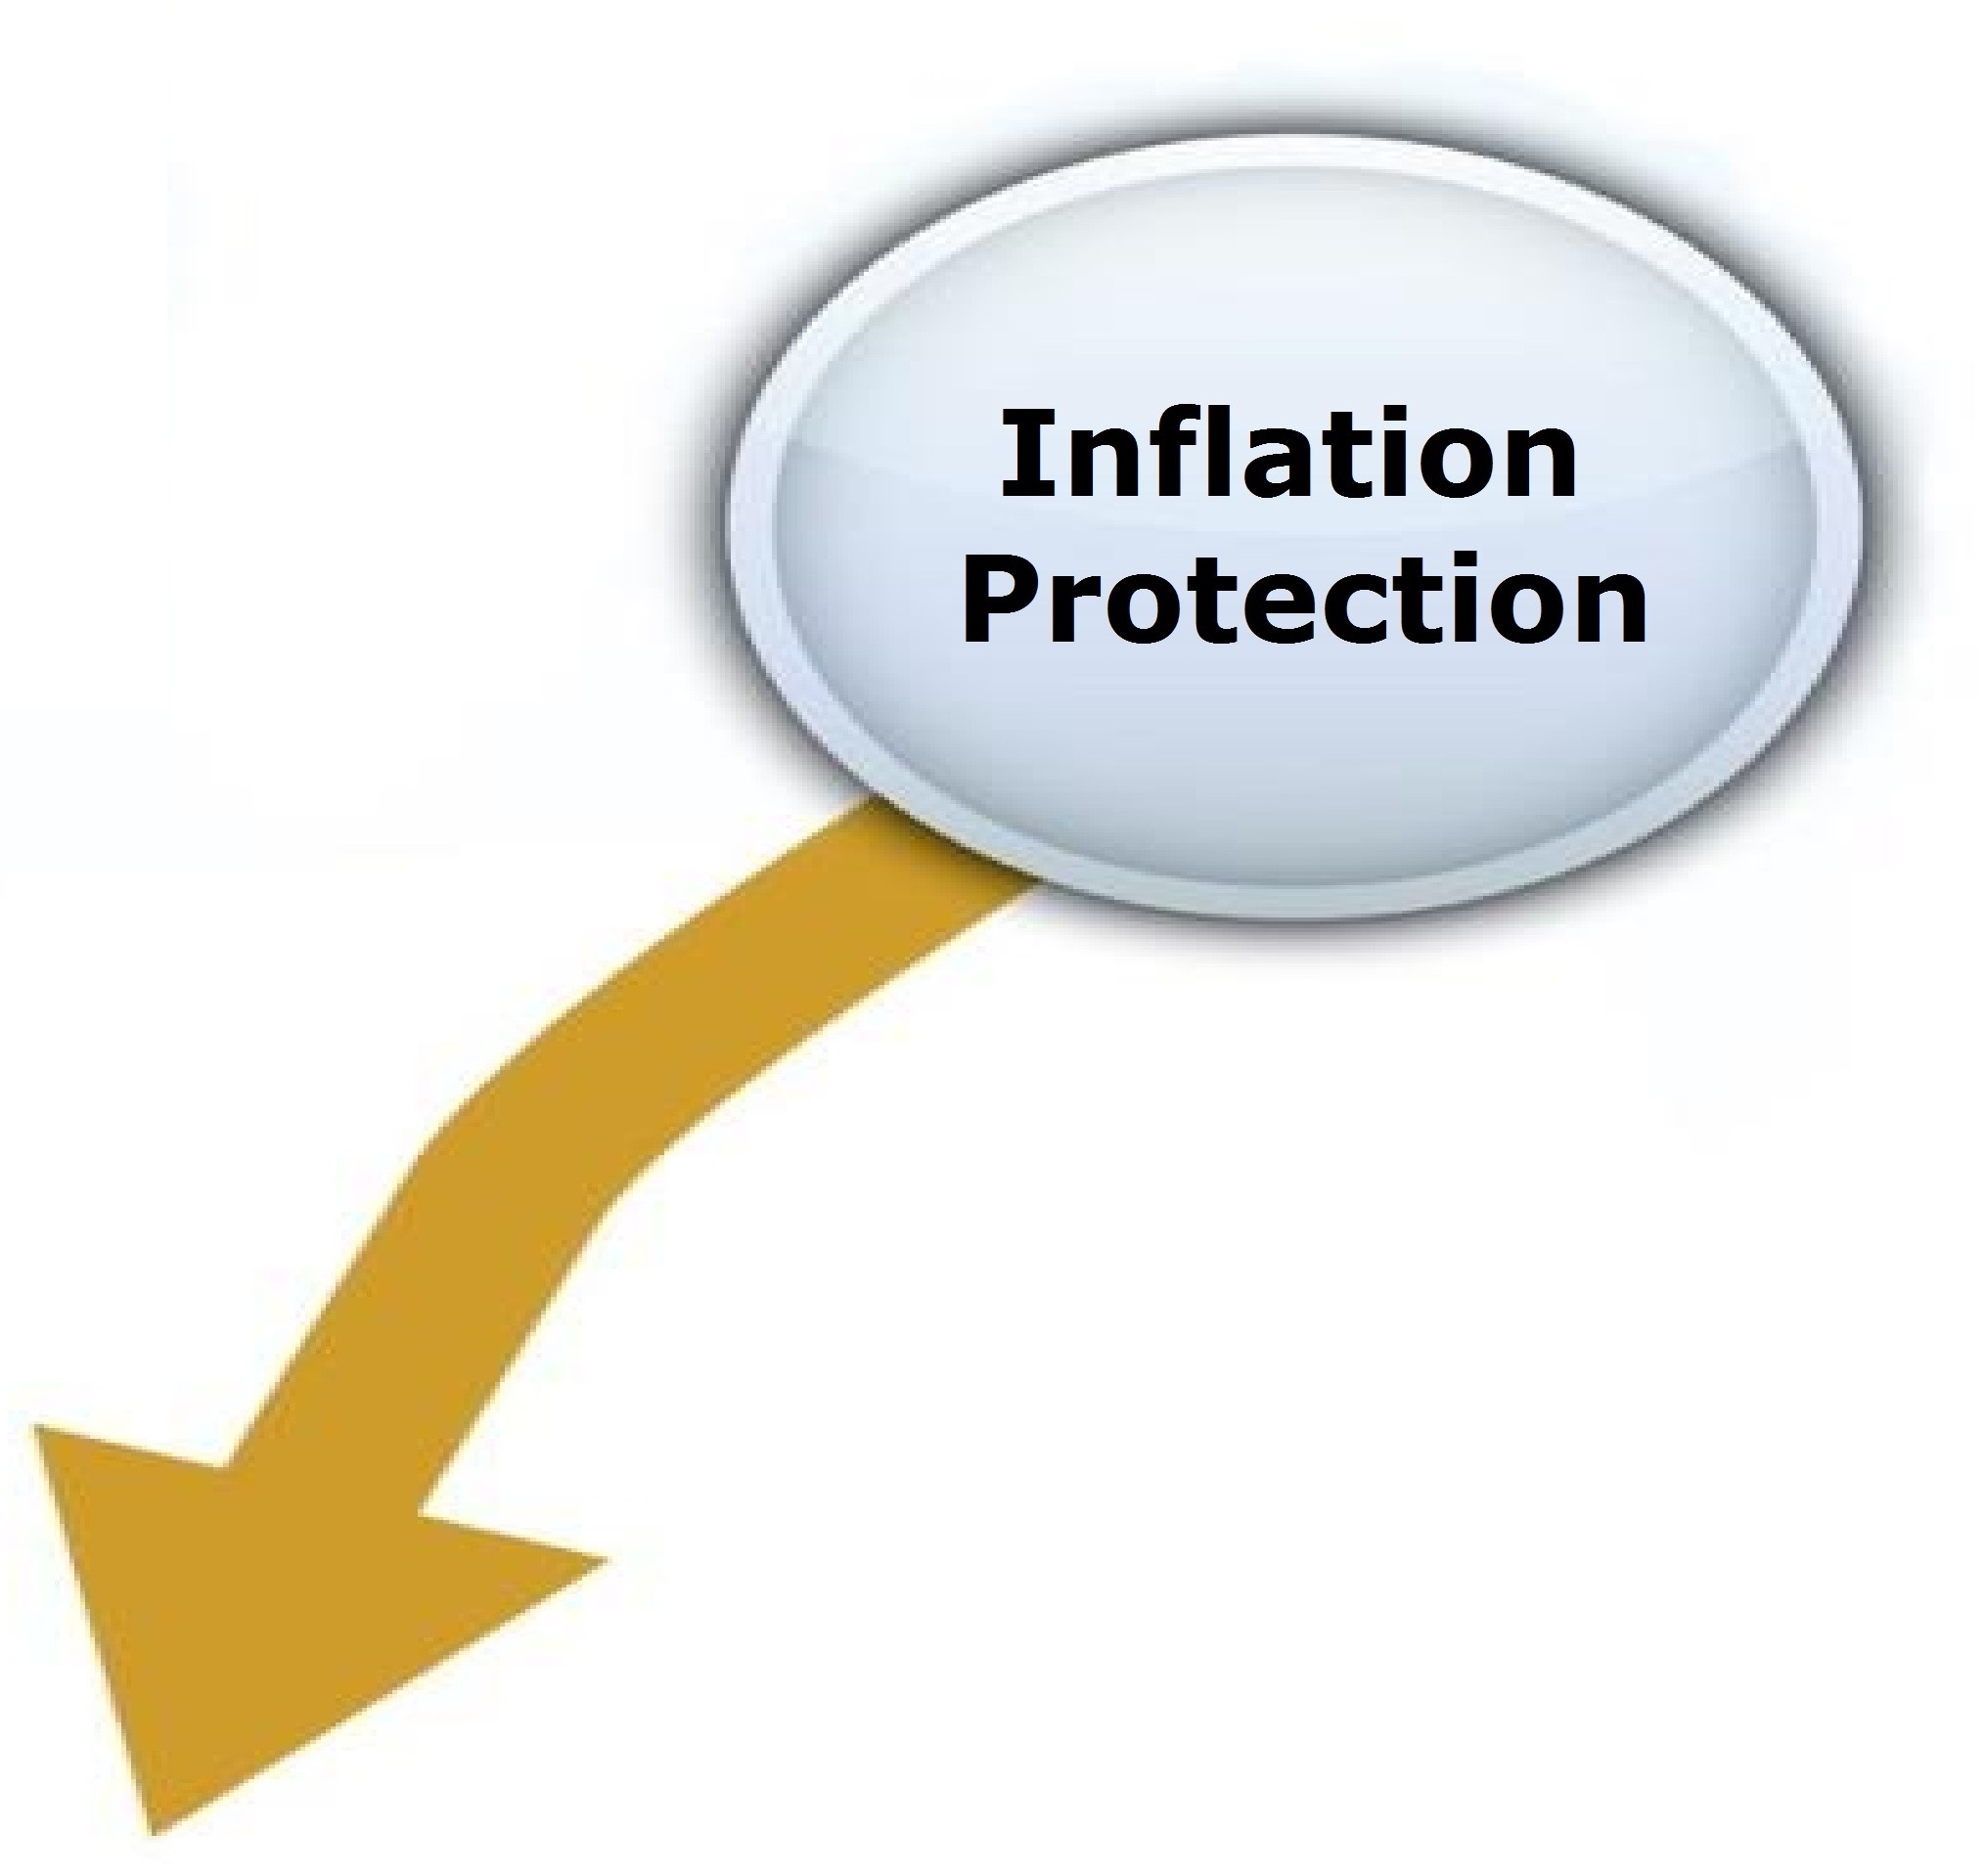 long-term care insurance inflation protection image